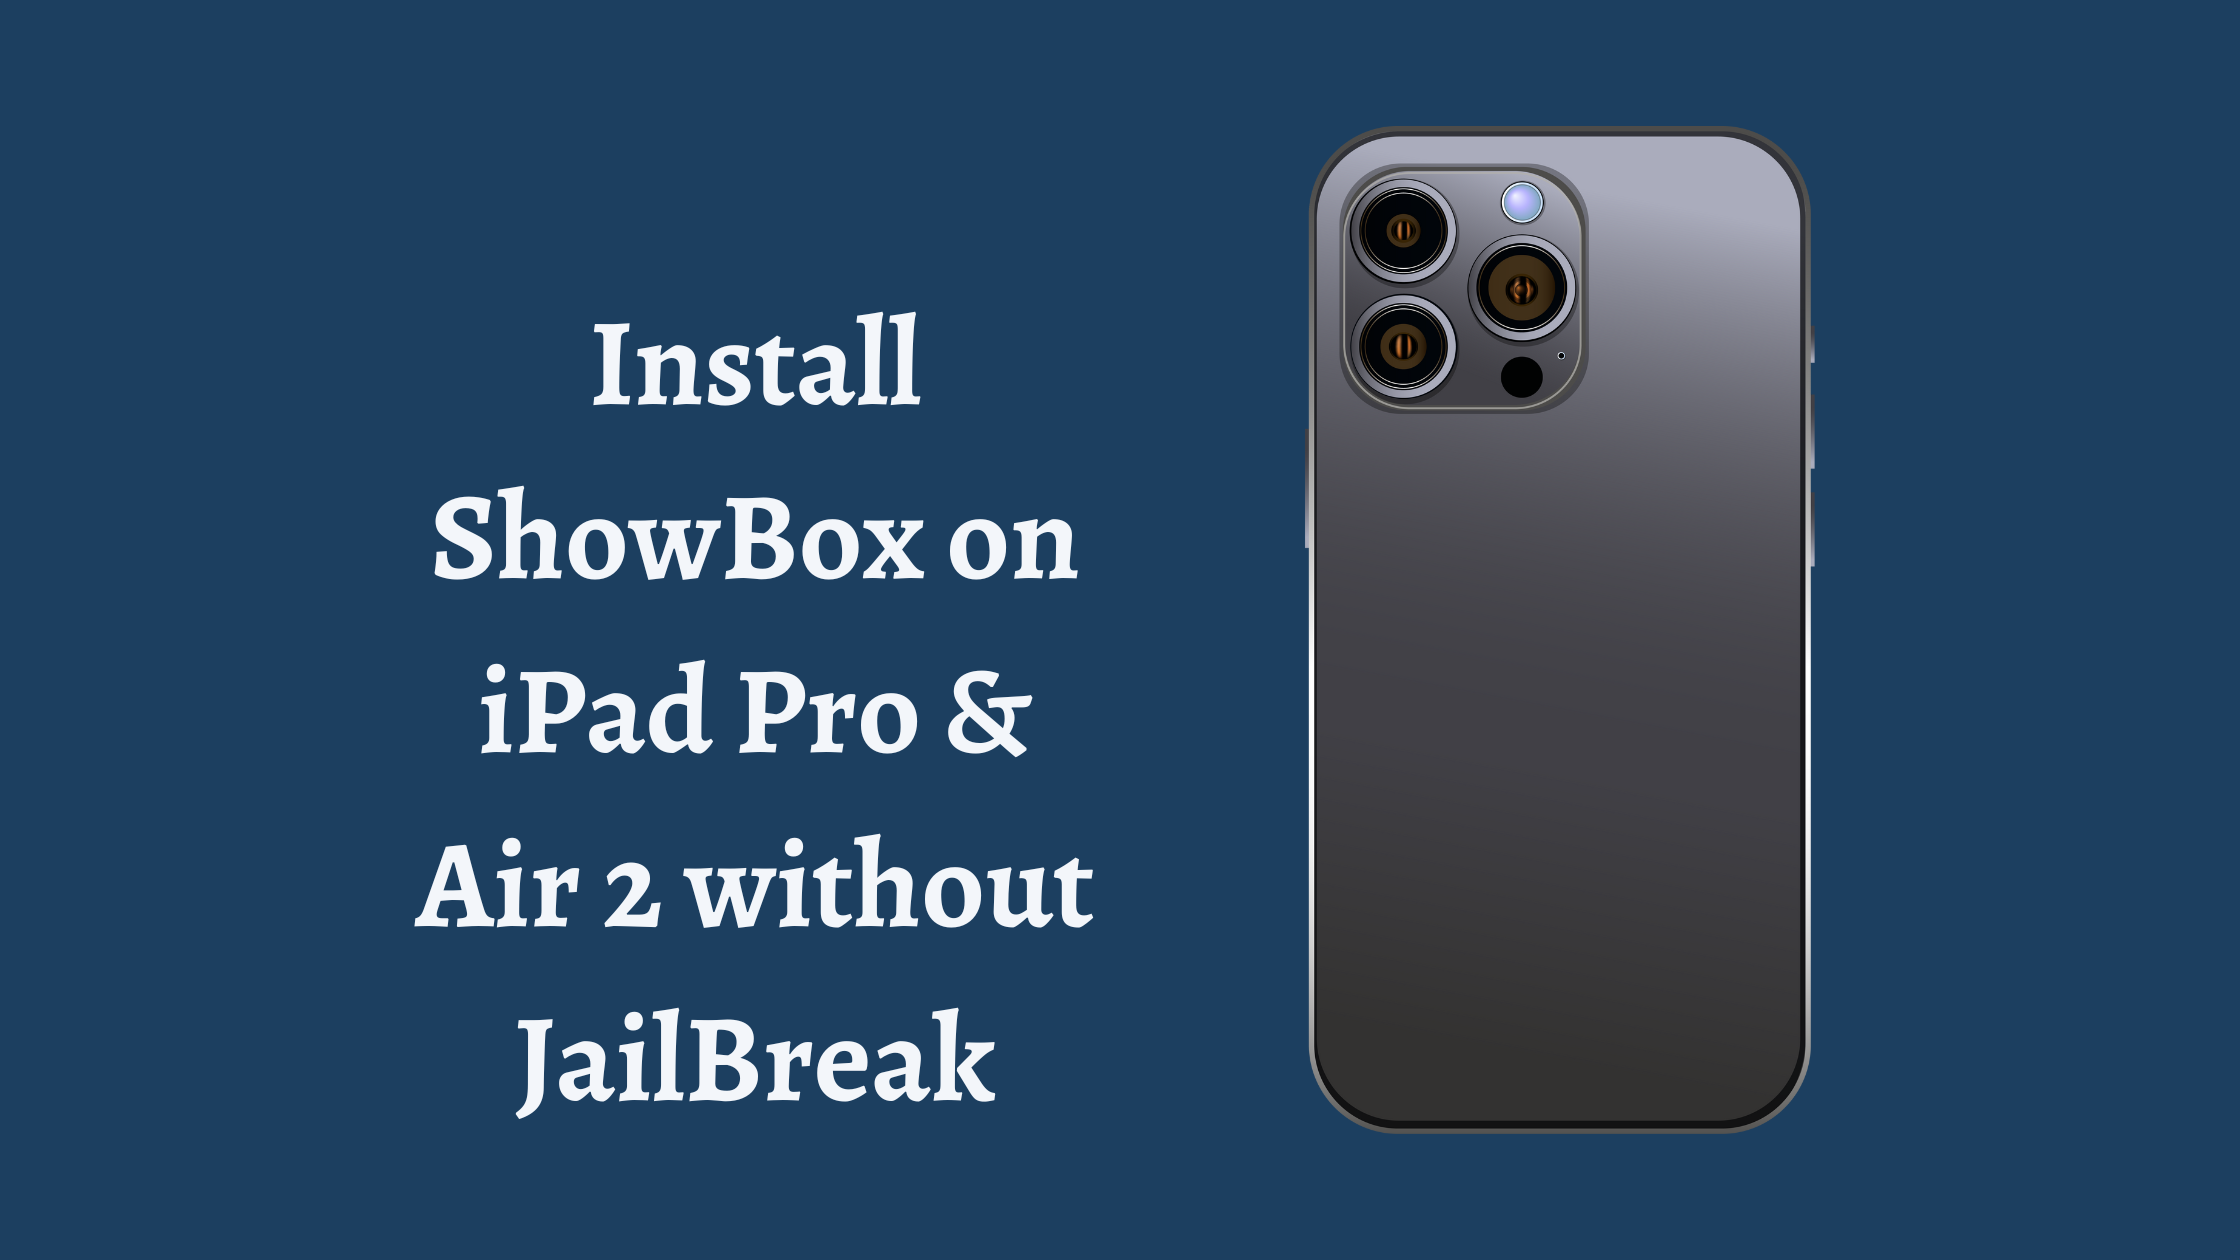 Steps to install ShowBox on iPad Pro & Air 2 without JailBreak